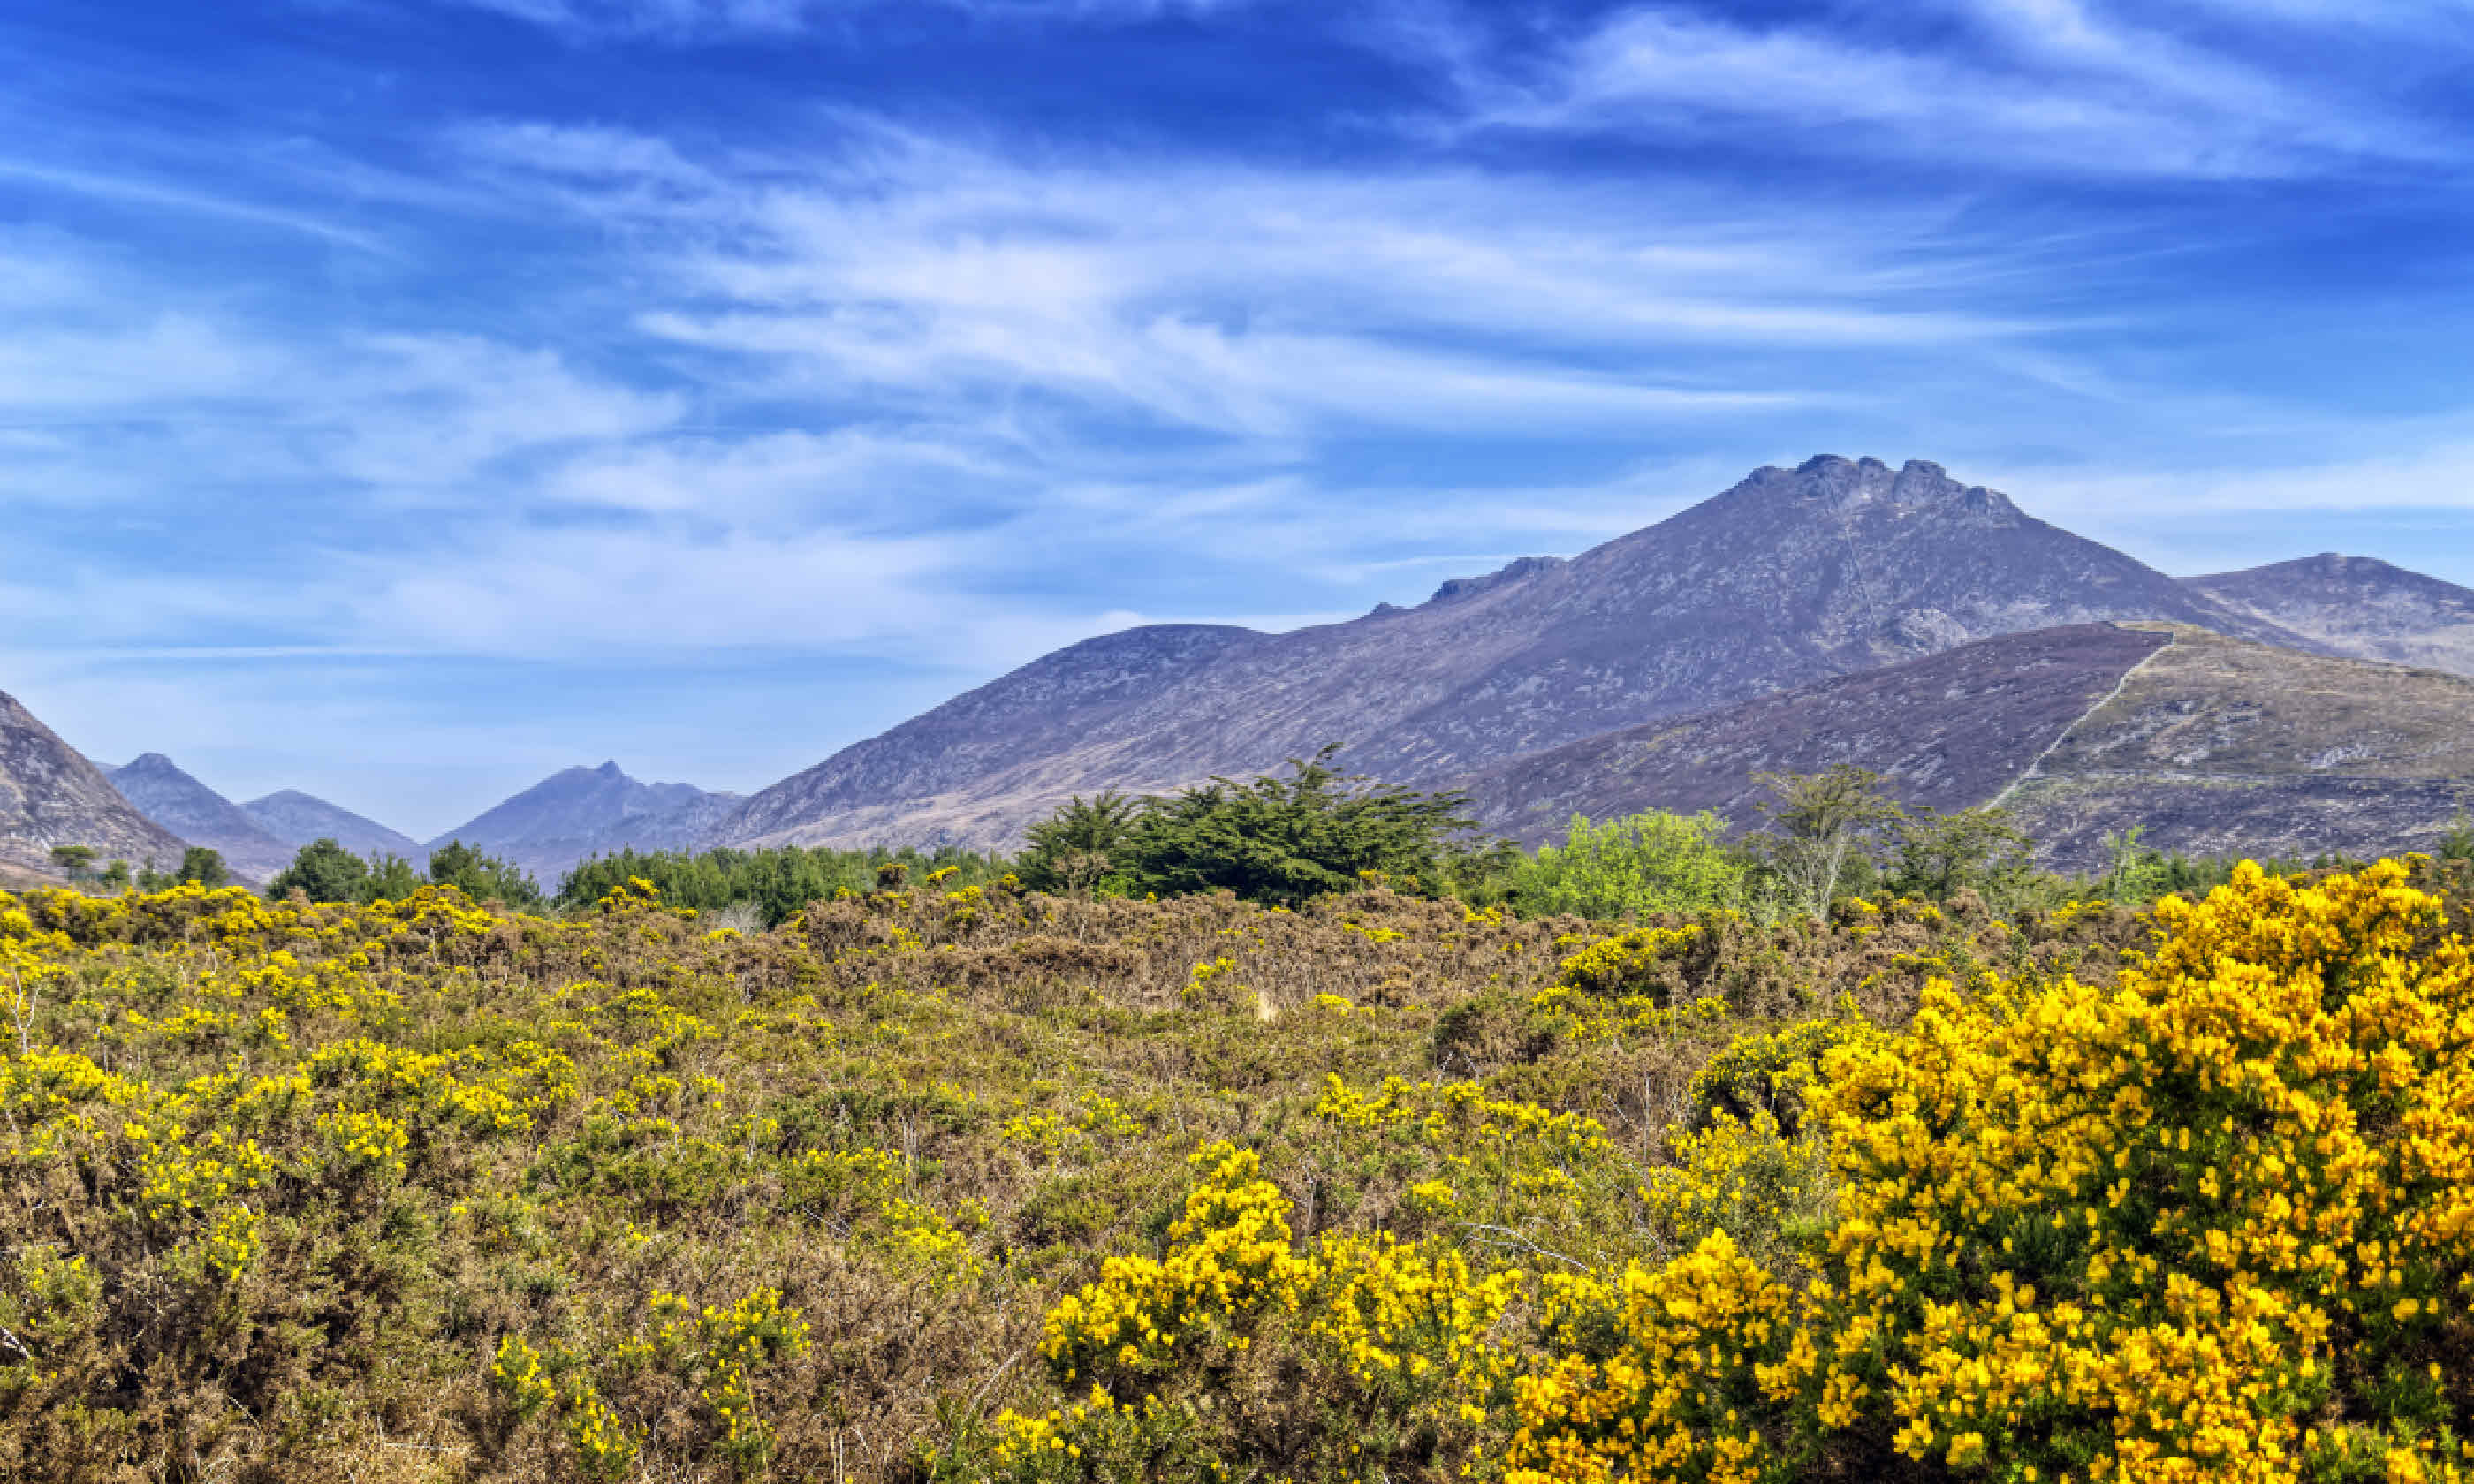 View of the Mourne Mountains, Ireland (Shutterstock: see credit below)